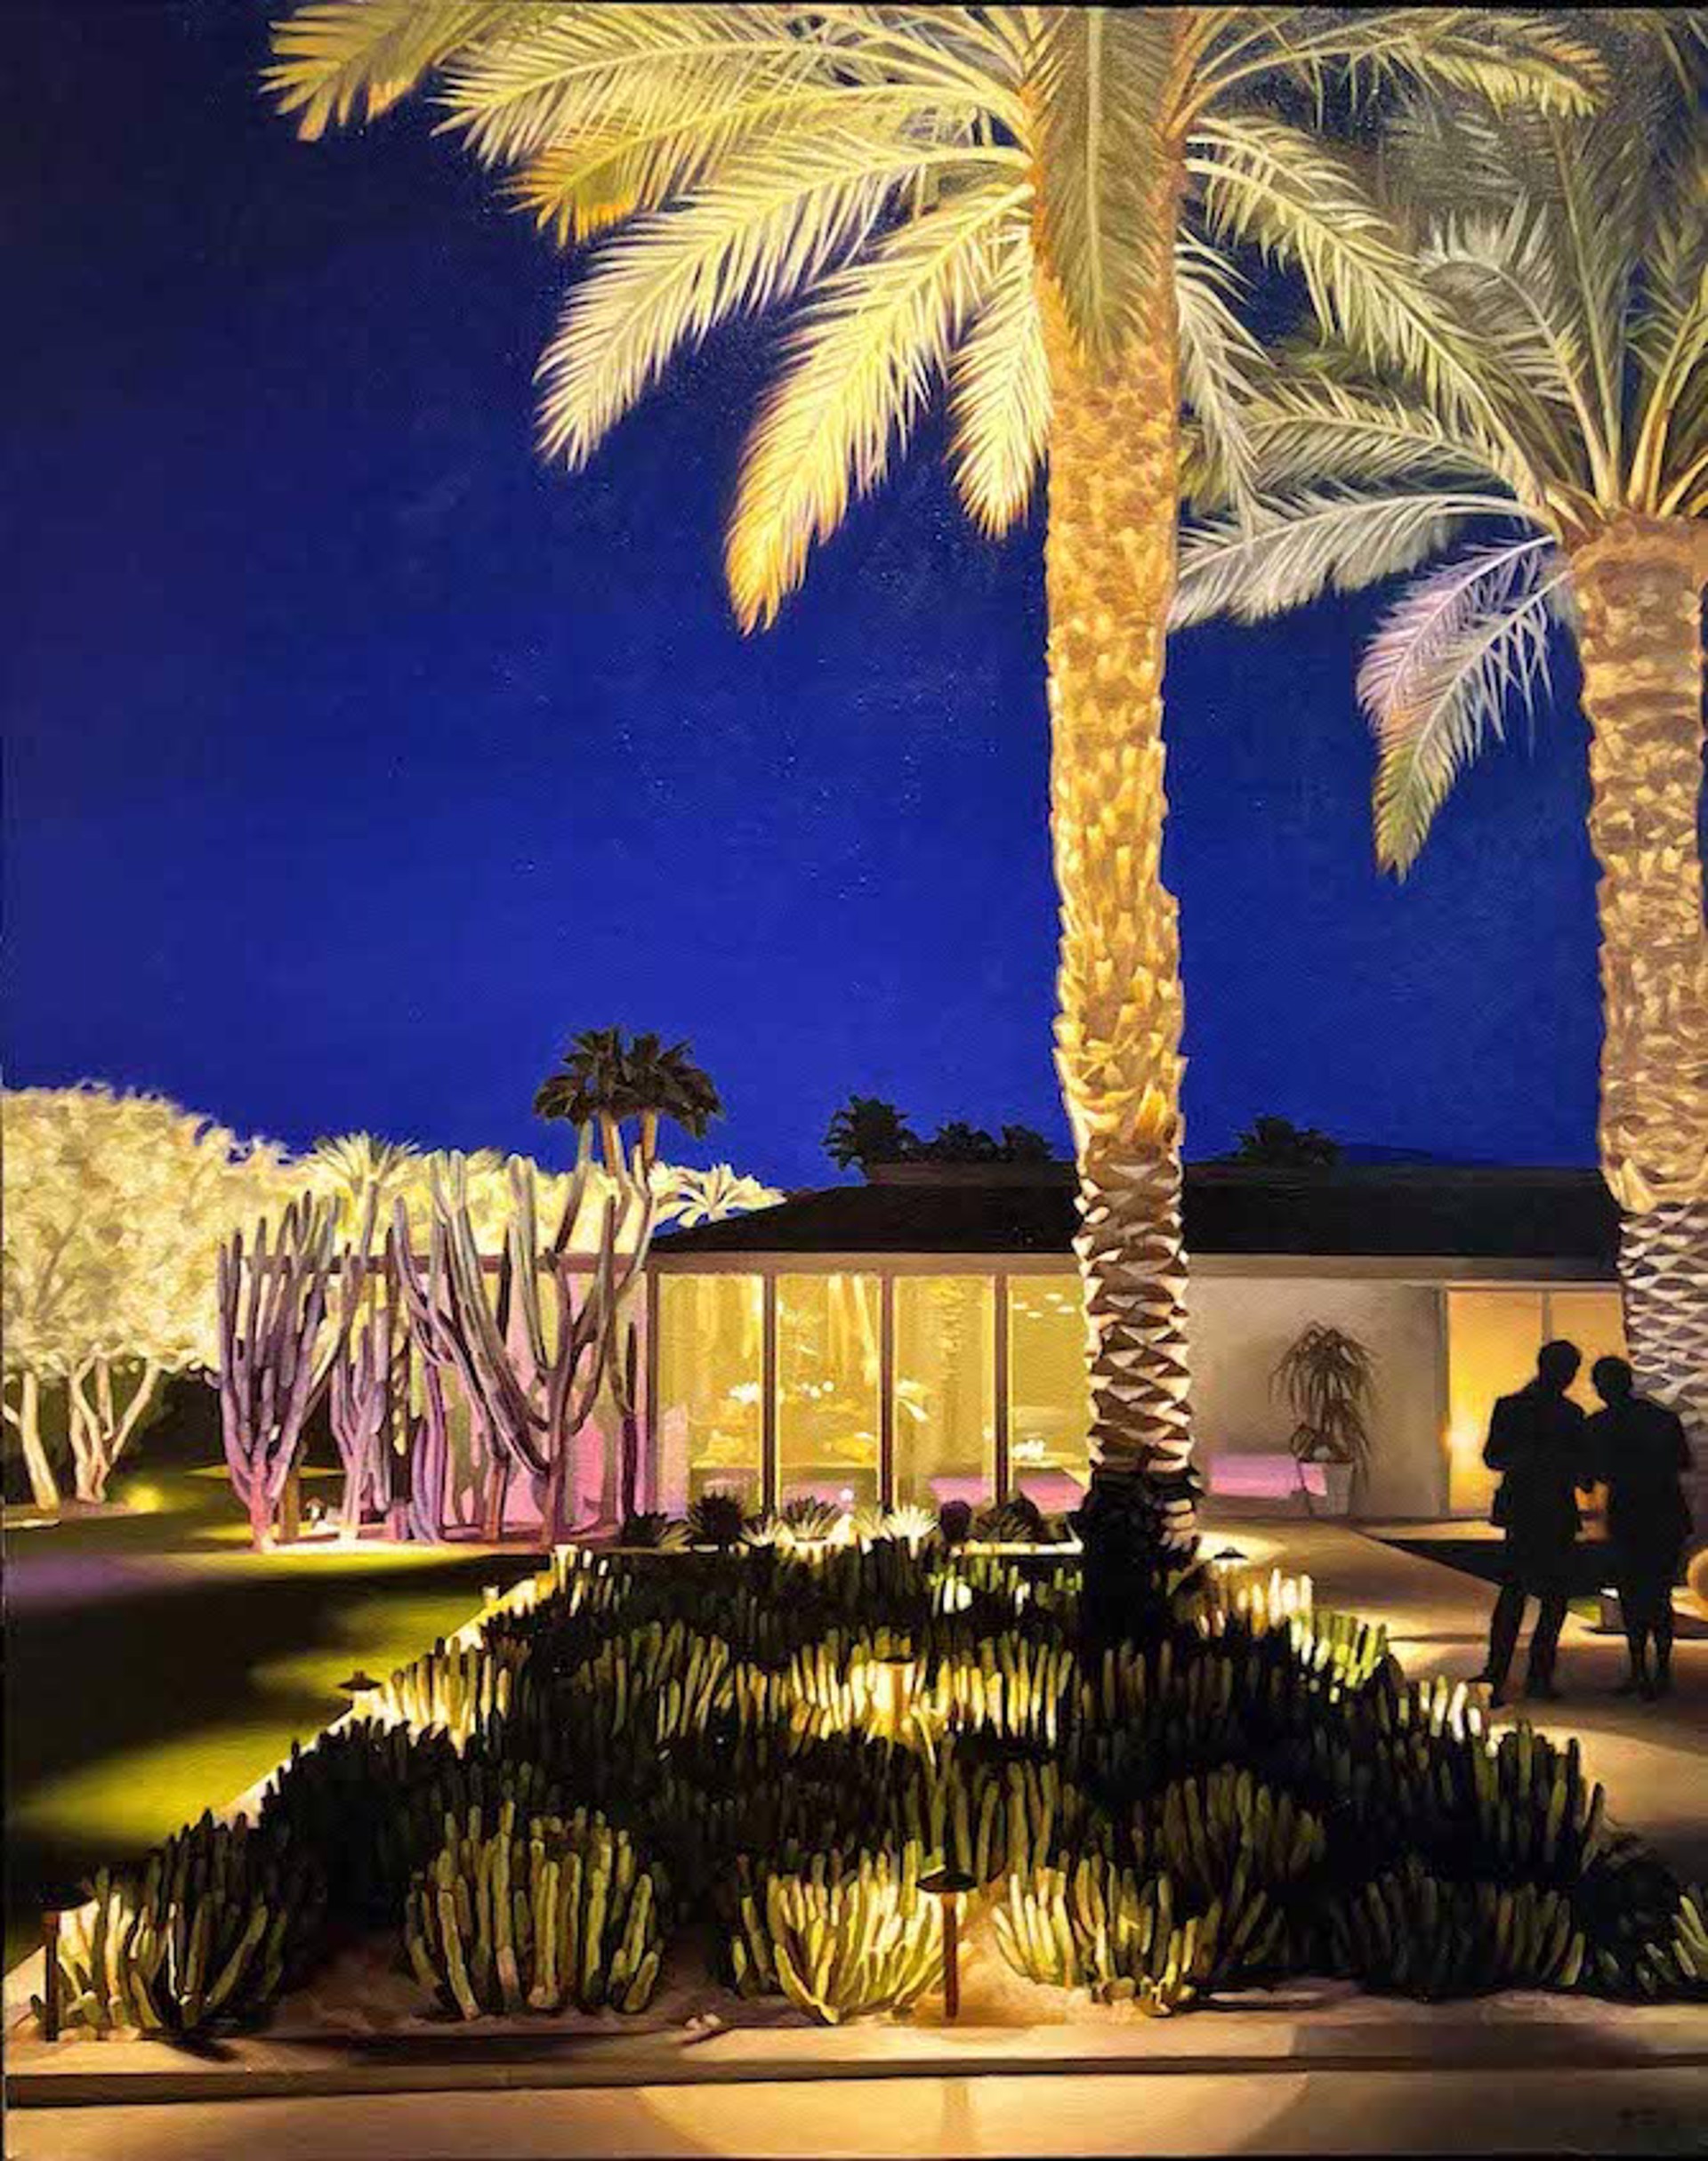 Night Chats by Carrie Graber